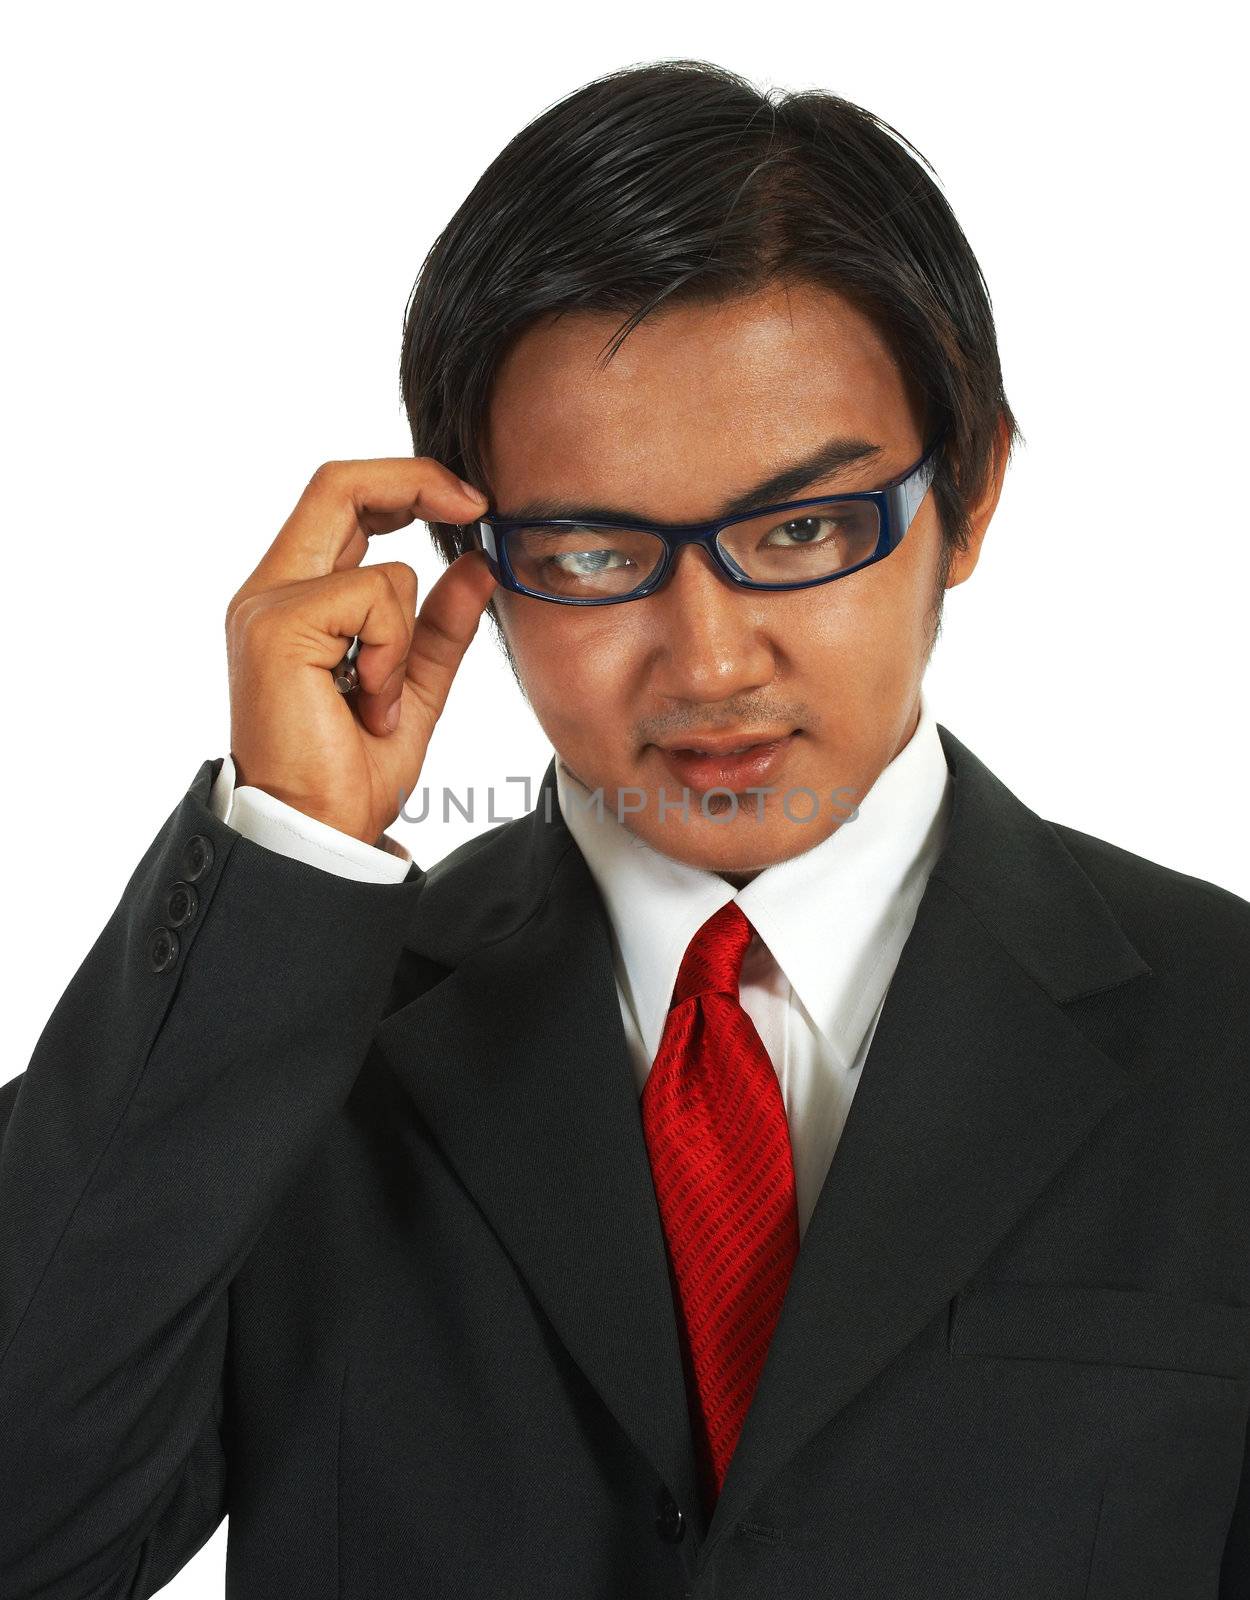 Businessman In Suit And Tie Wearing Glasses